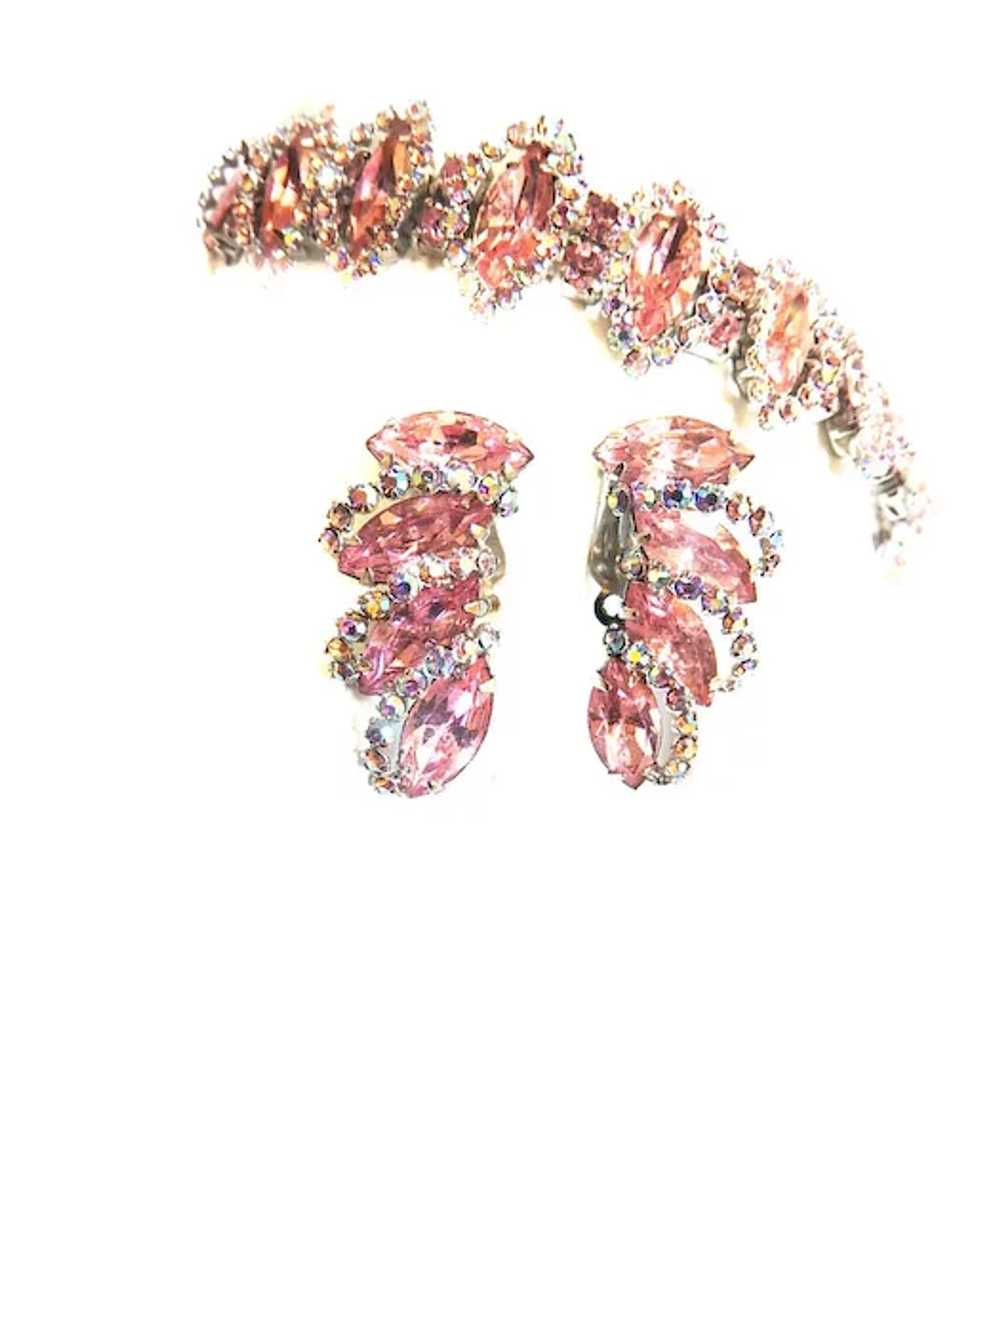 Weiss 1950s Pretty in Pink Bracelet and Earrings - image 3